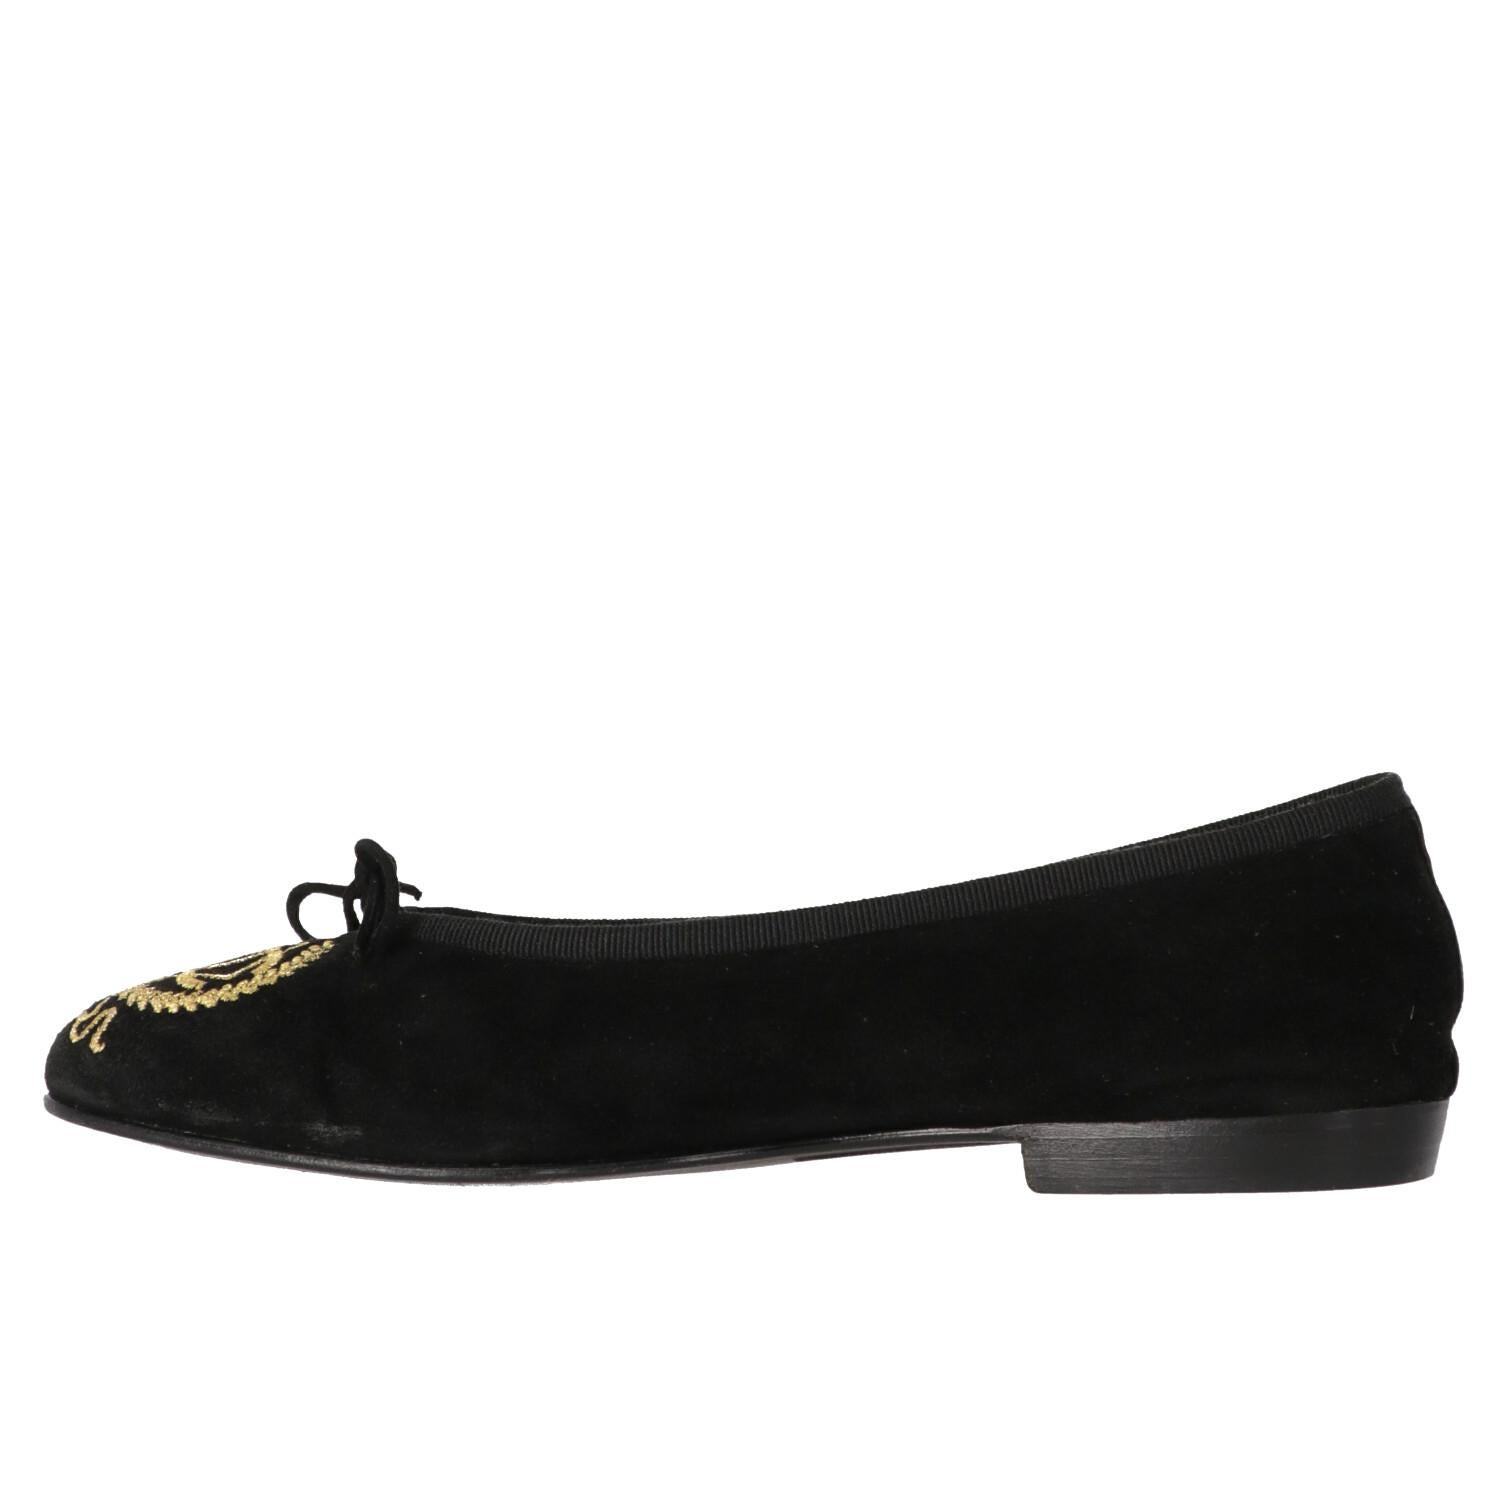 Chanel 2010s black suede ballet flats, with gros grain hem, decorative black laces and gold embroidery on the round toe.

Size: 39 EU

Heel height: 1,5 cm
Insole length: 24,5 cm

Product code: X0017

Notes: Original Box included.

The product shows